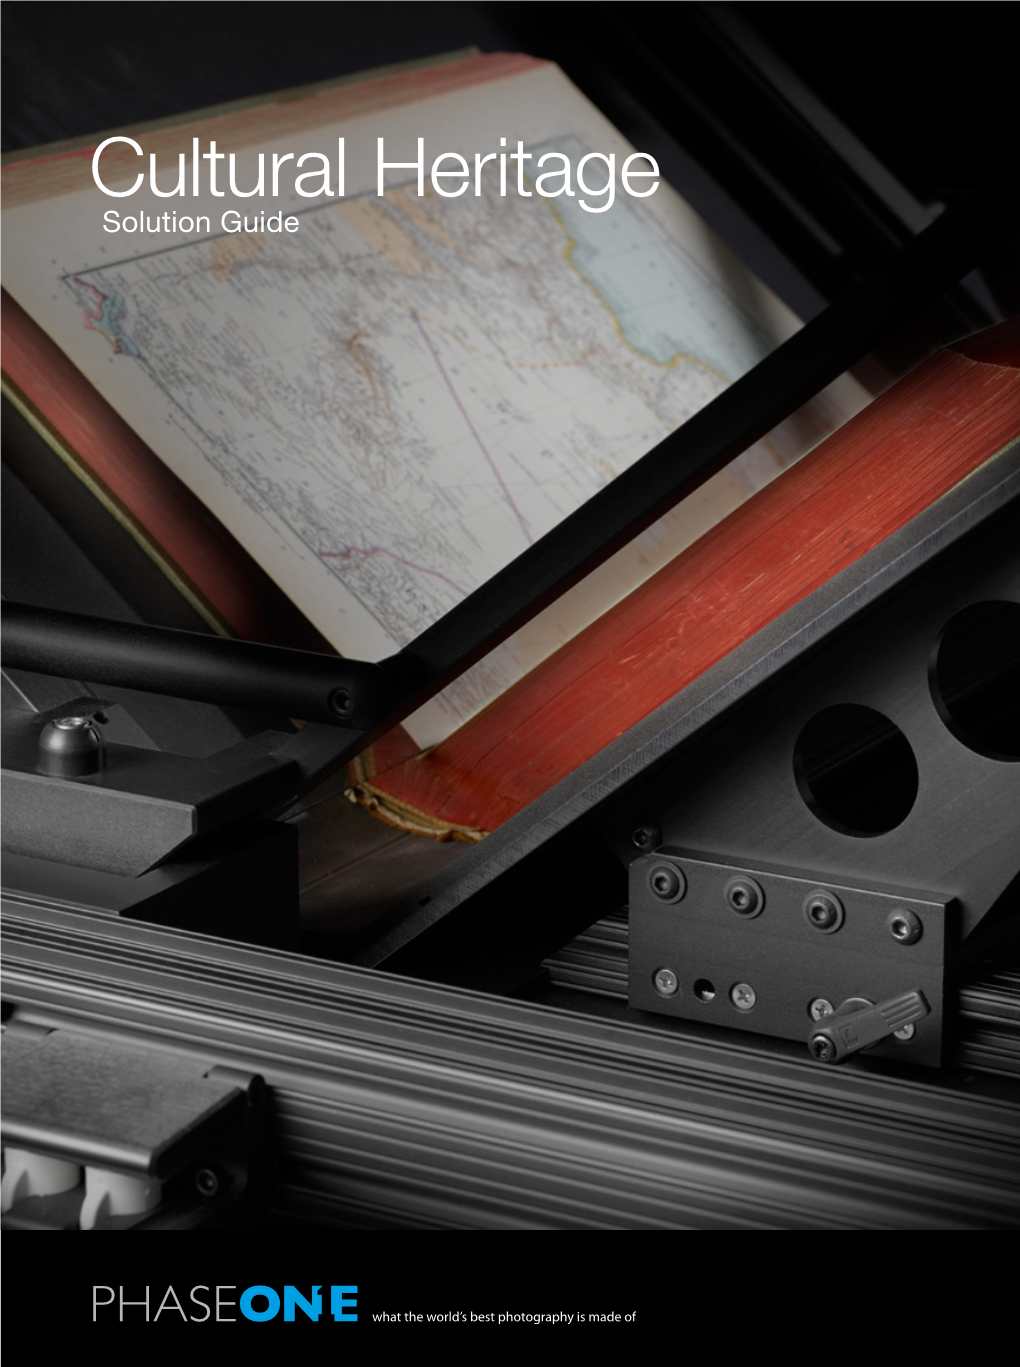 Cultural Heritage Solution Guide